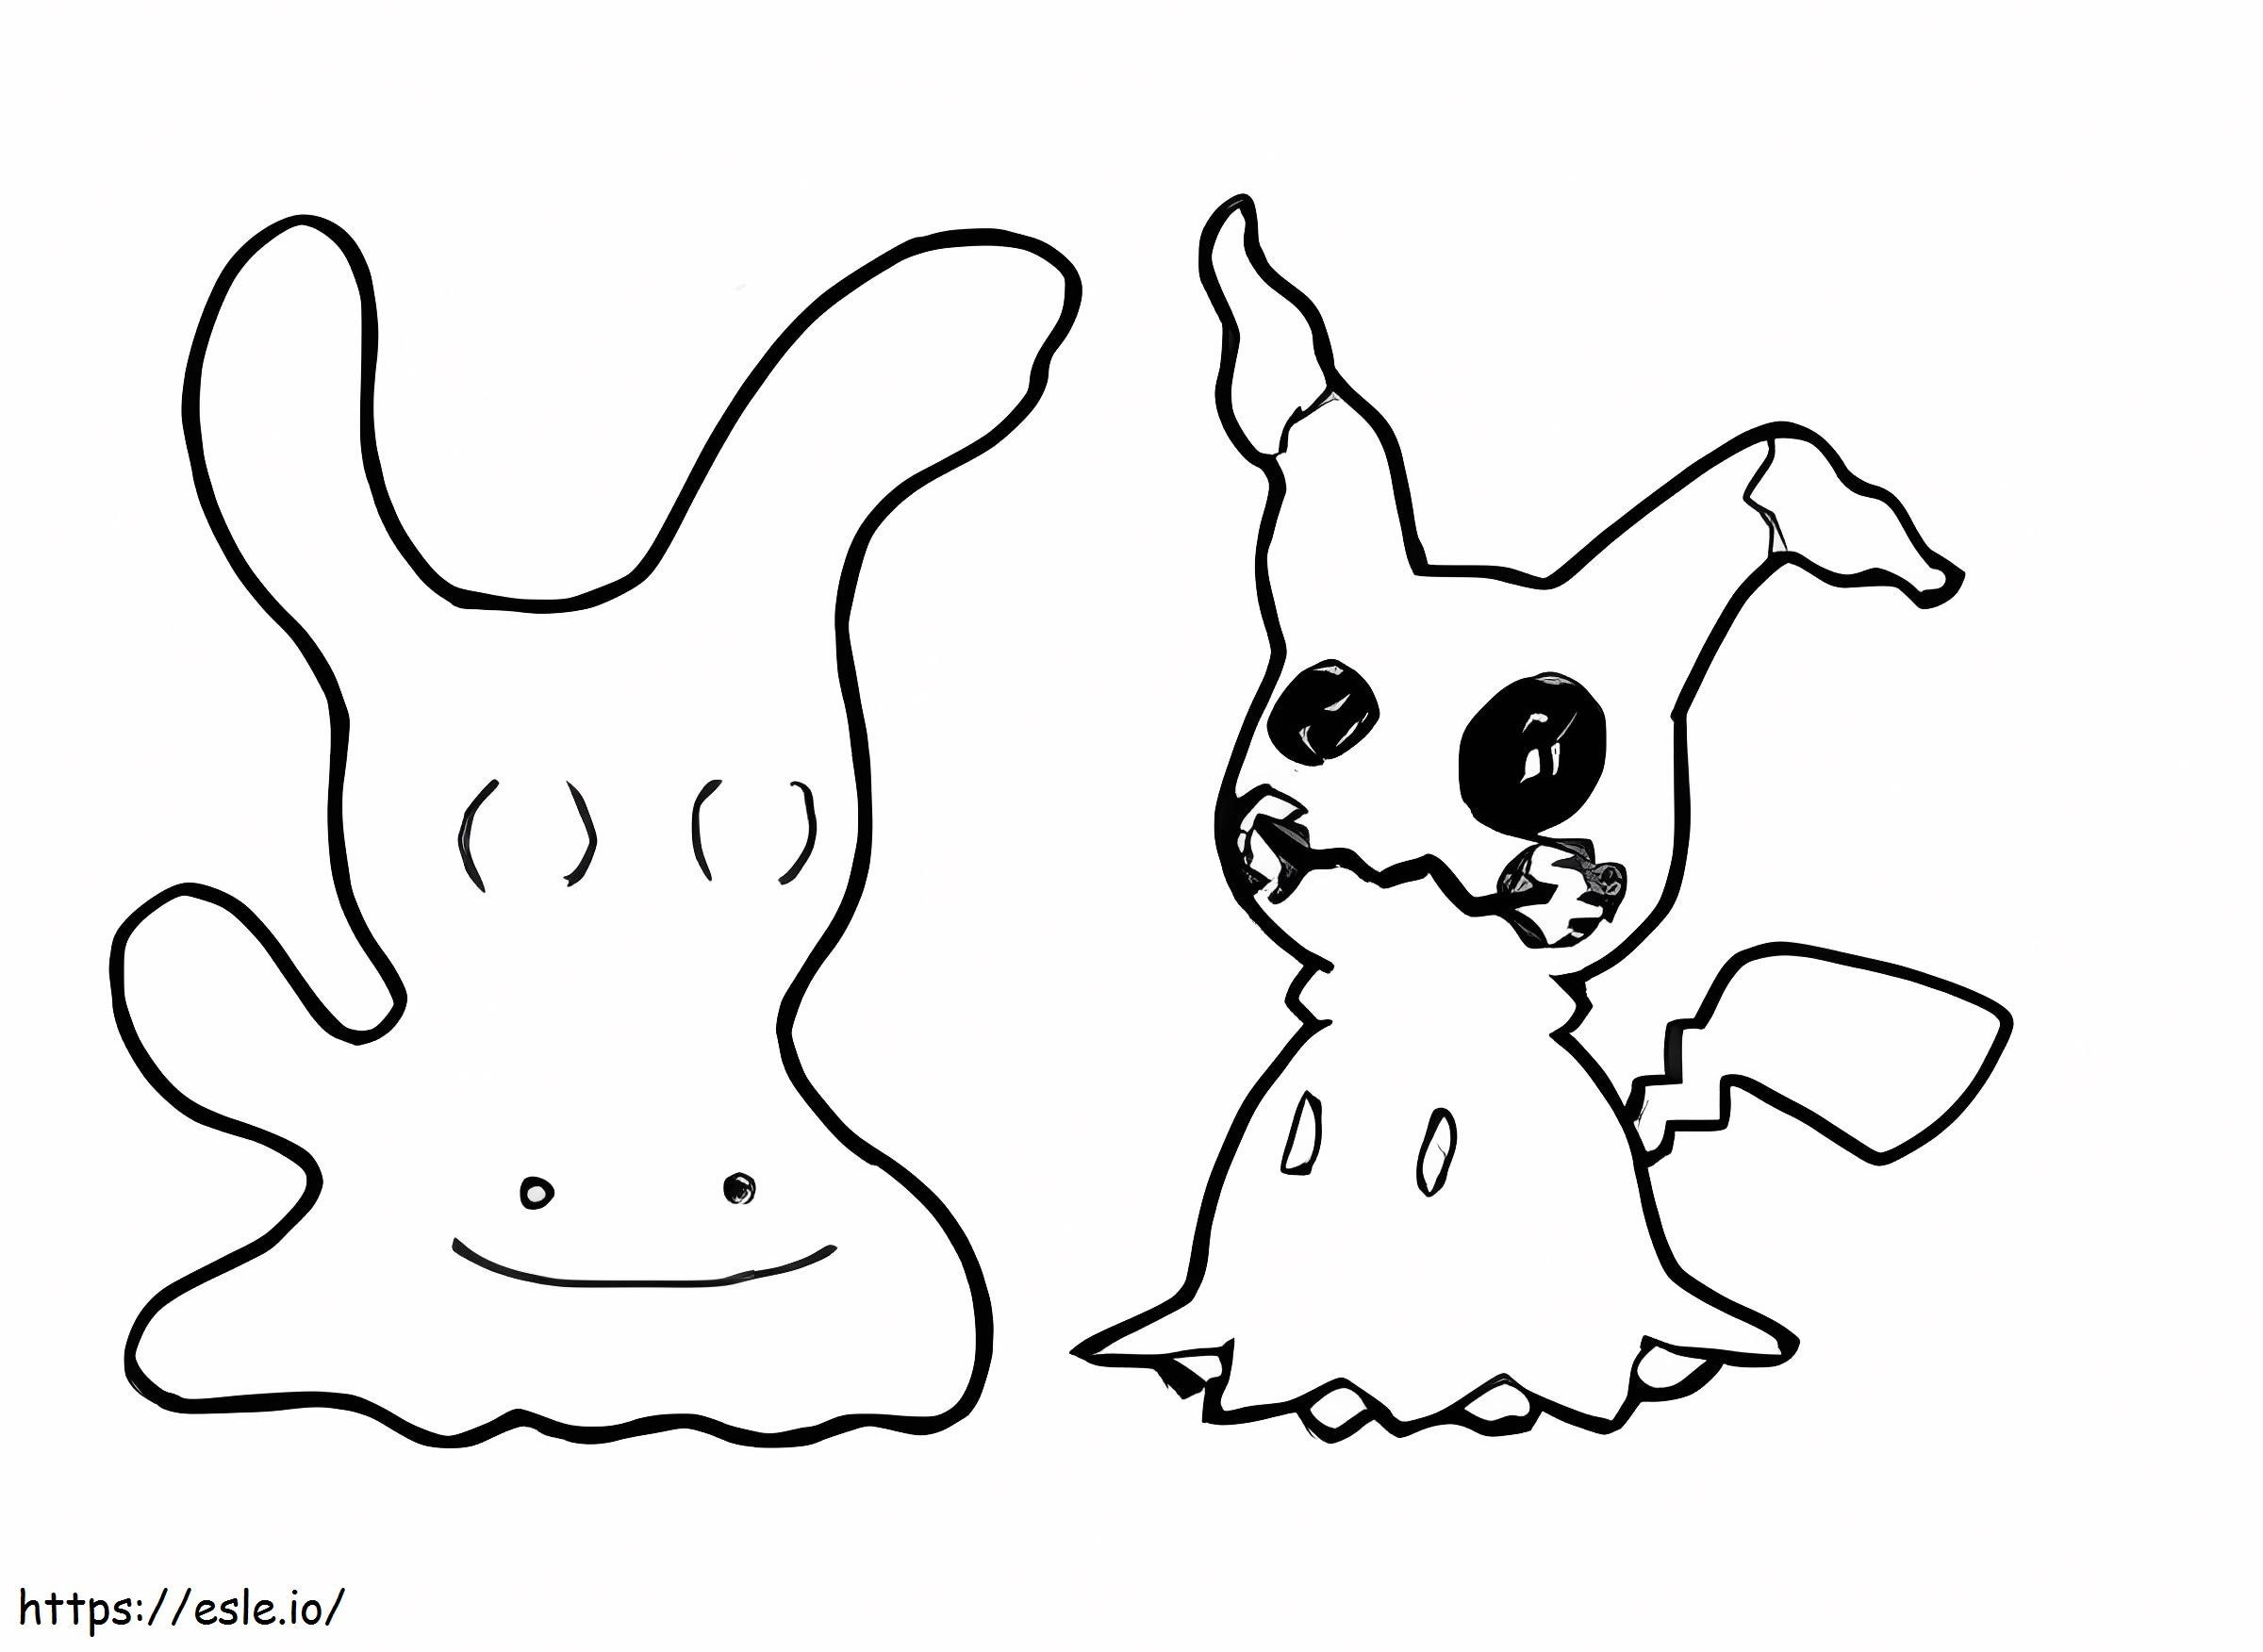 Ditto 5 coloring page